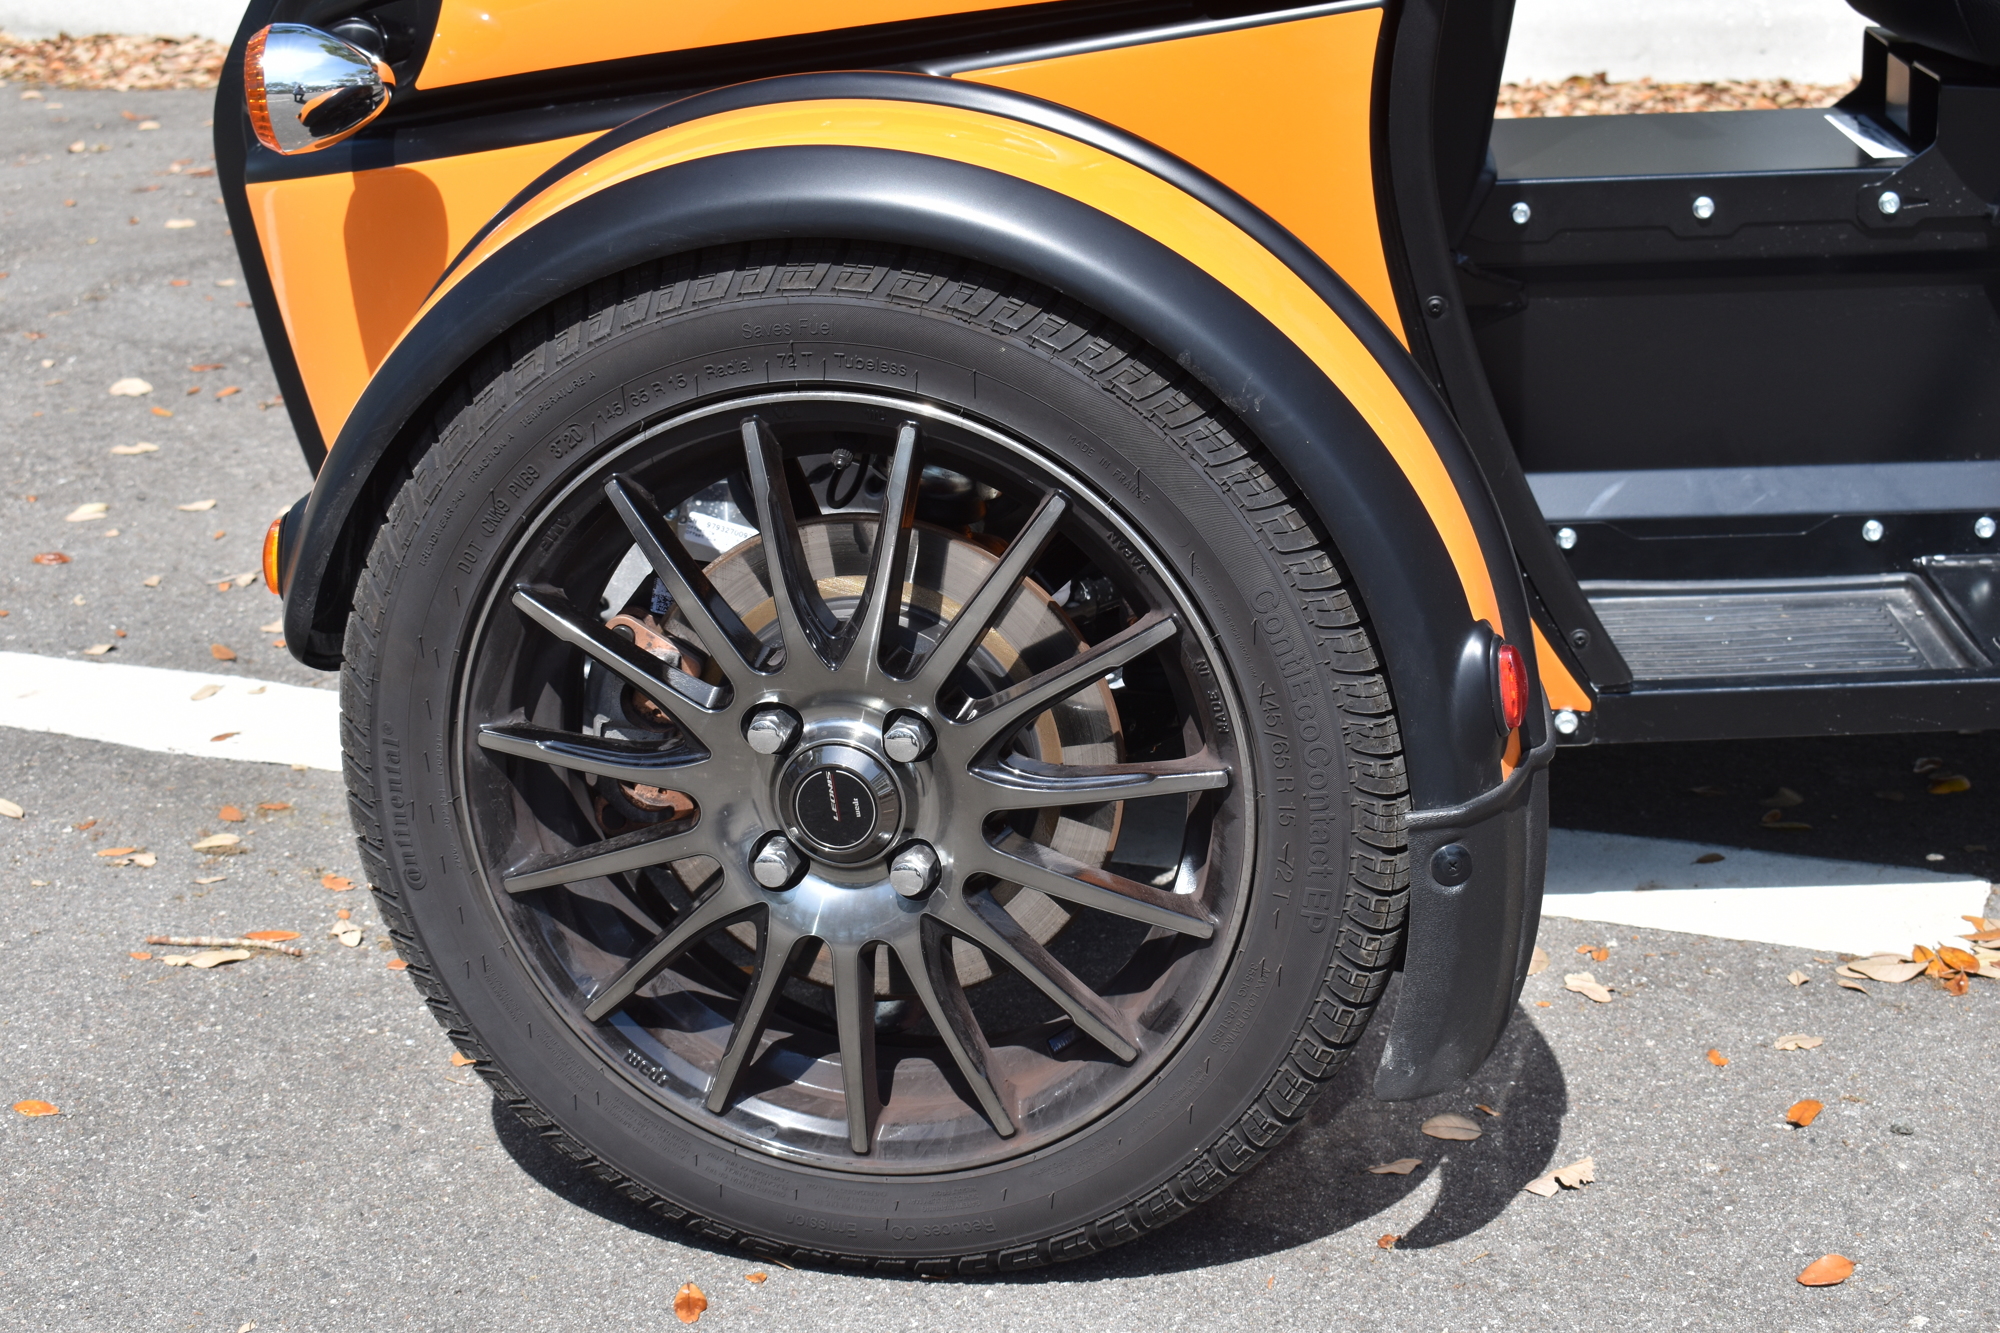 The vehicle rides on traditional automotive wheels and tires. Just three of them.